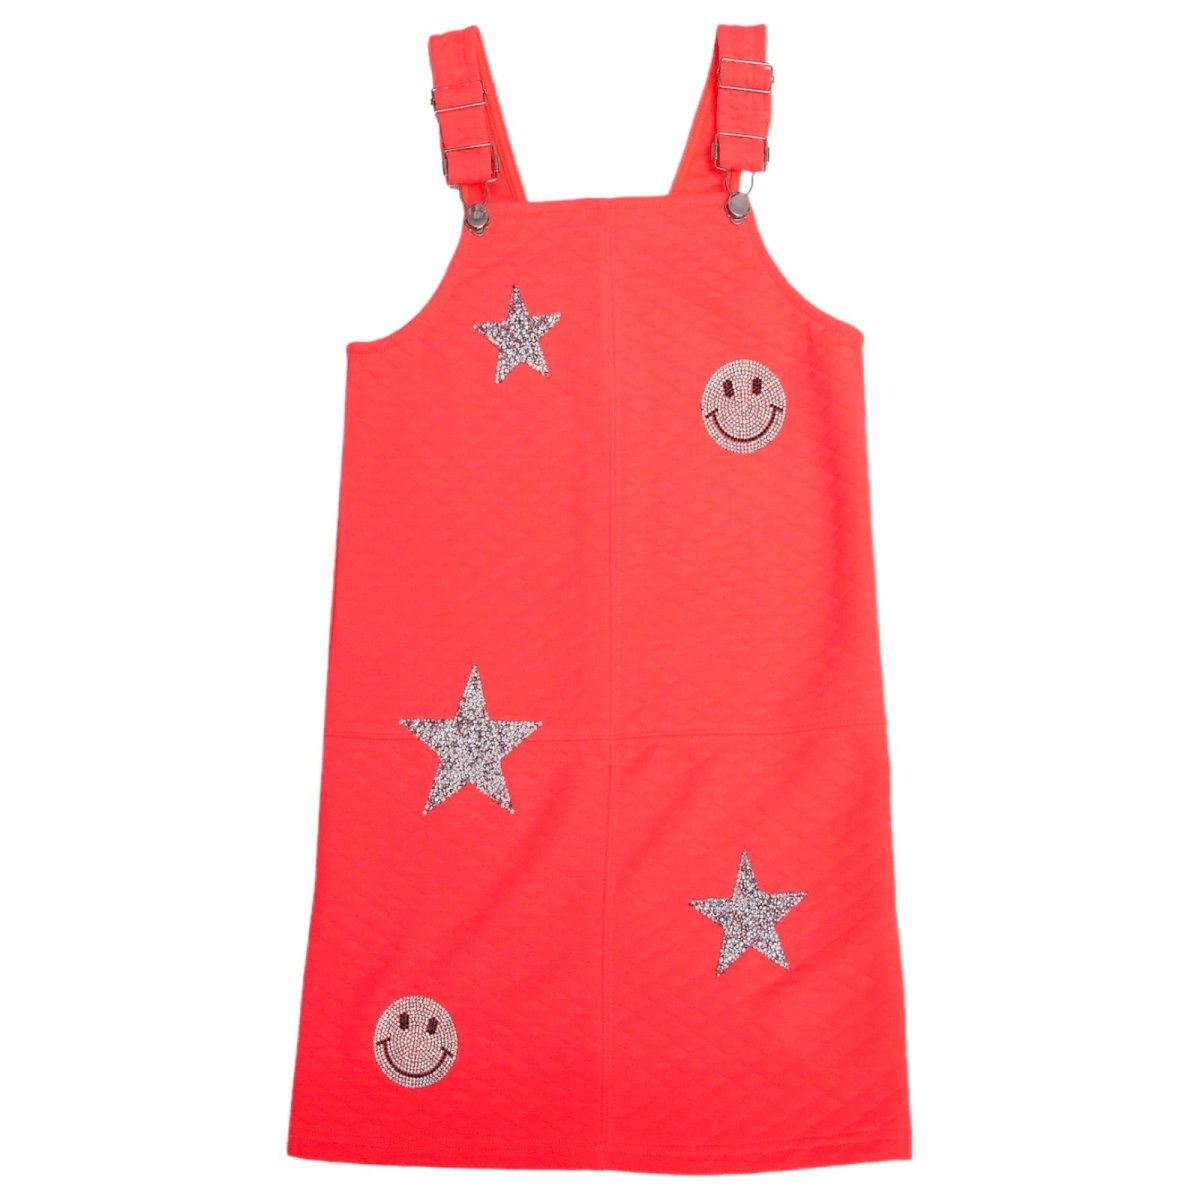 METALLIC PATCHES NEON OVERALL DRESS - DRESSES